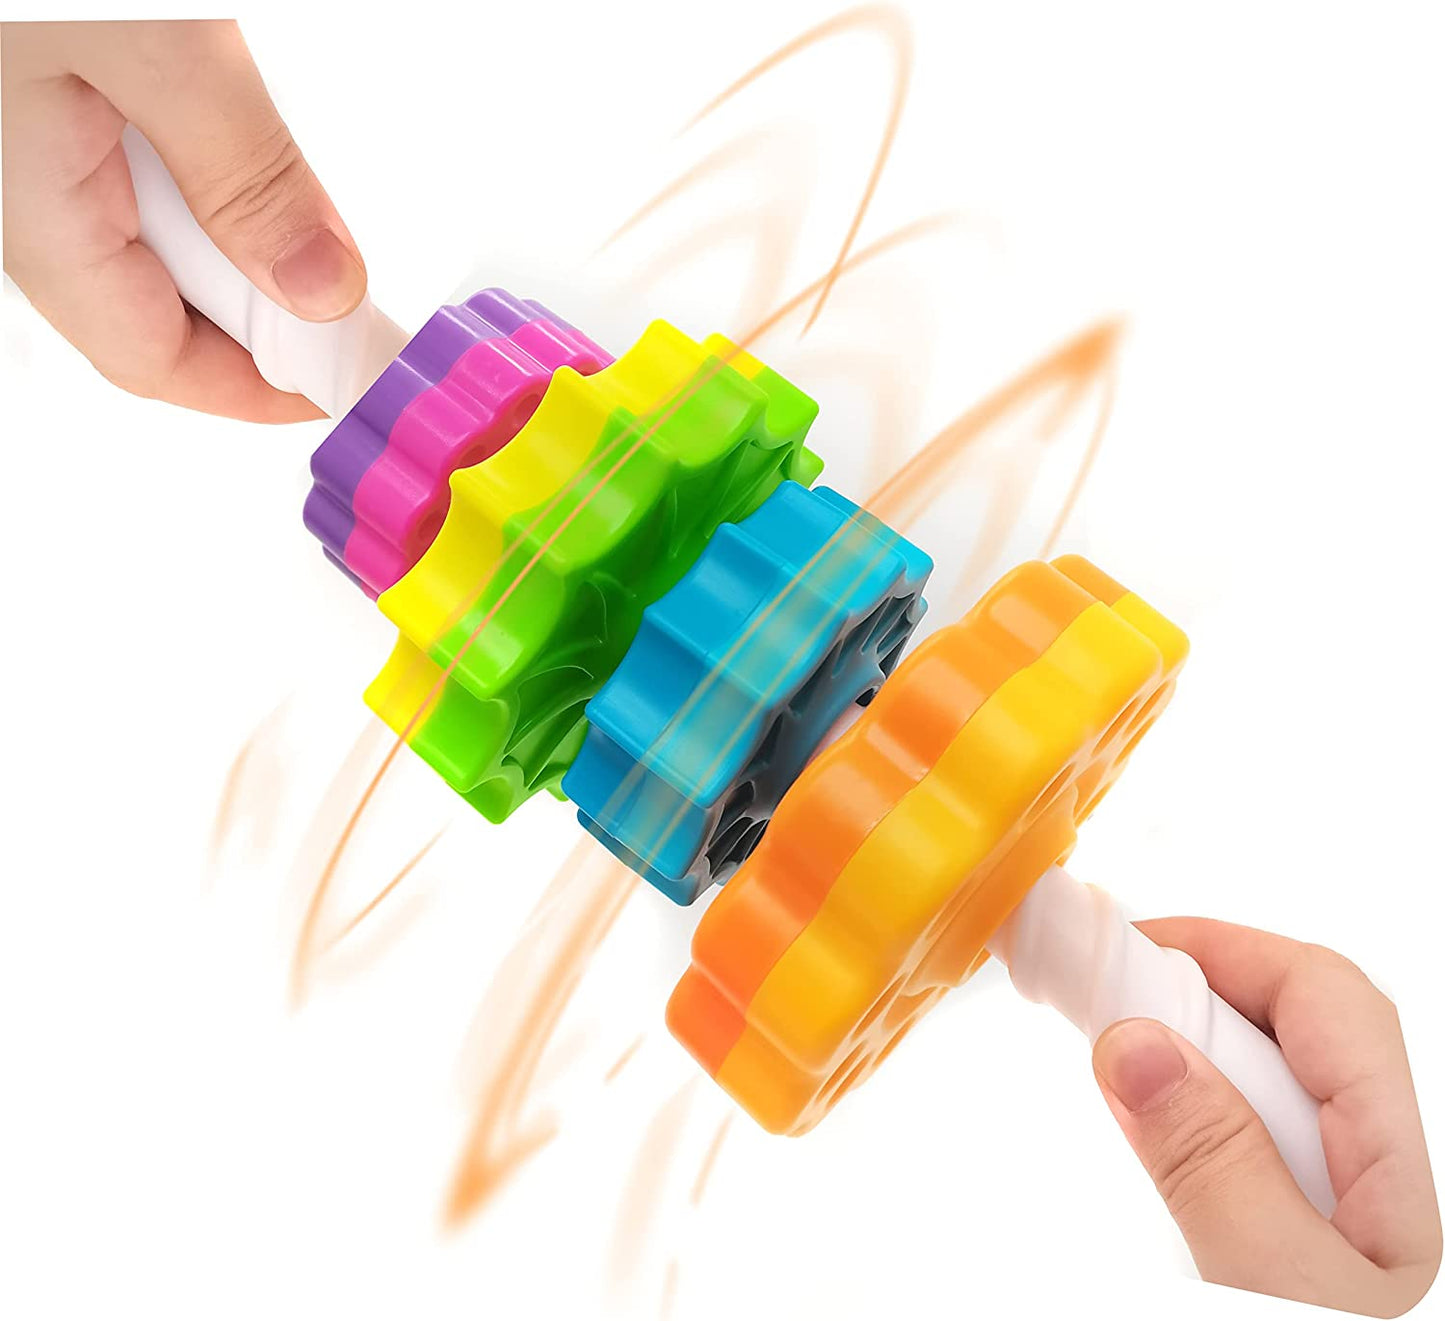 Spinning and Stacking Toy: Rainbow Spin Tower for Toddler Learning and Sensory Exploration